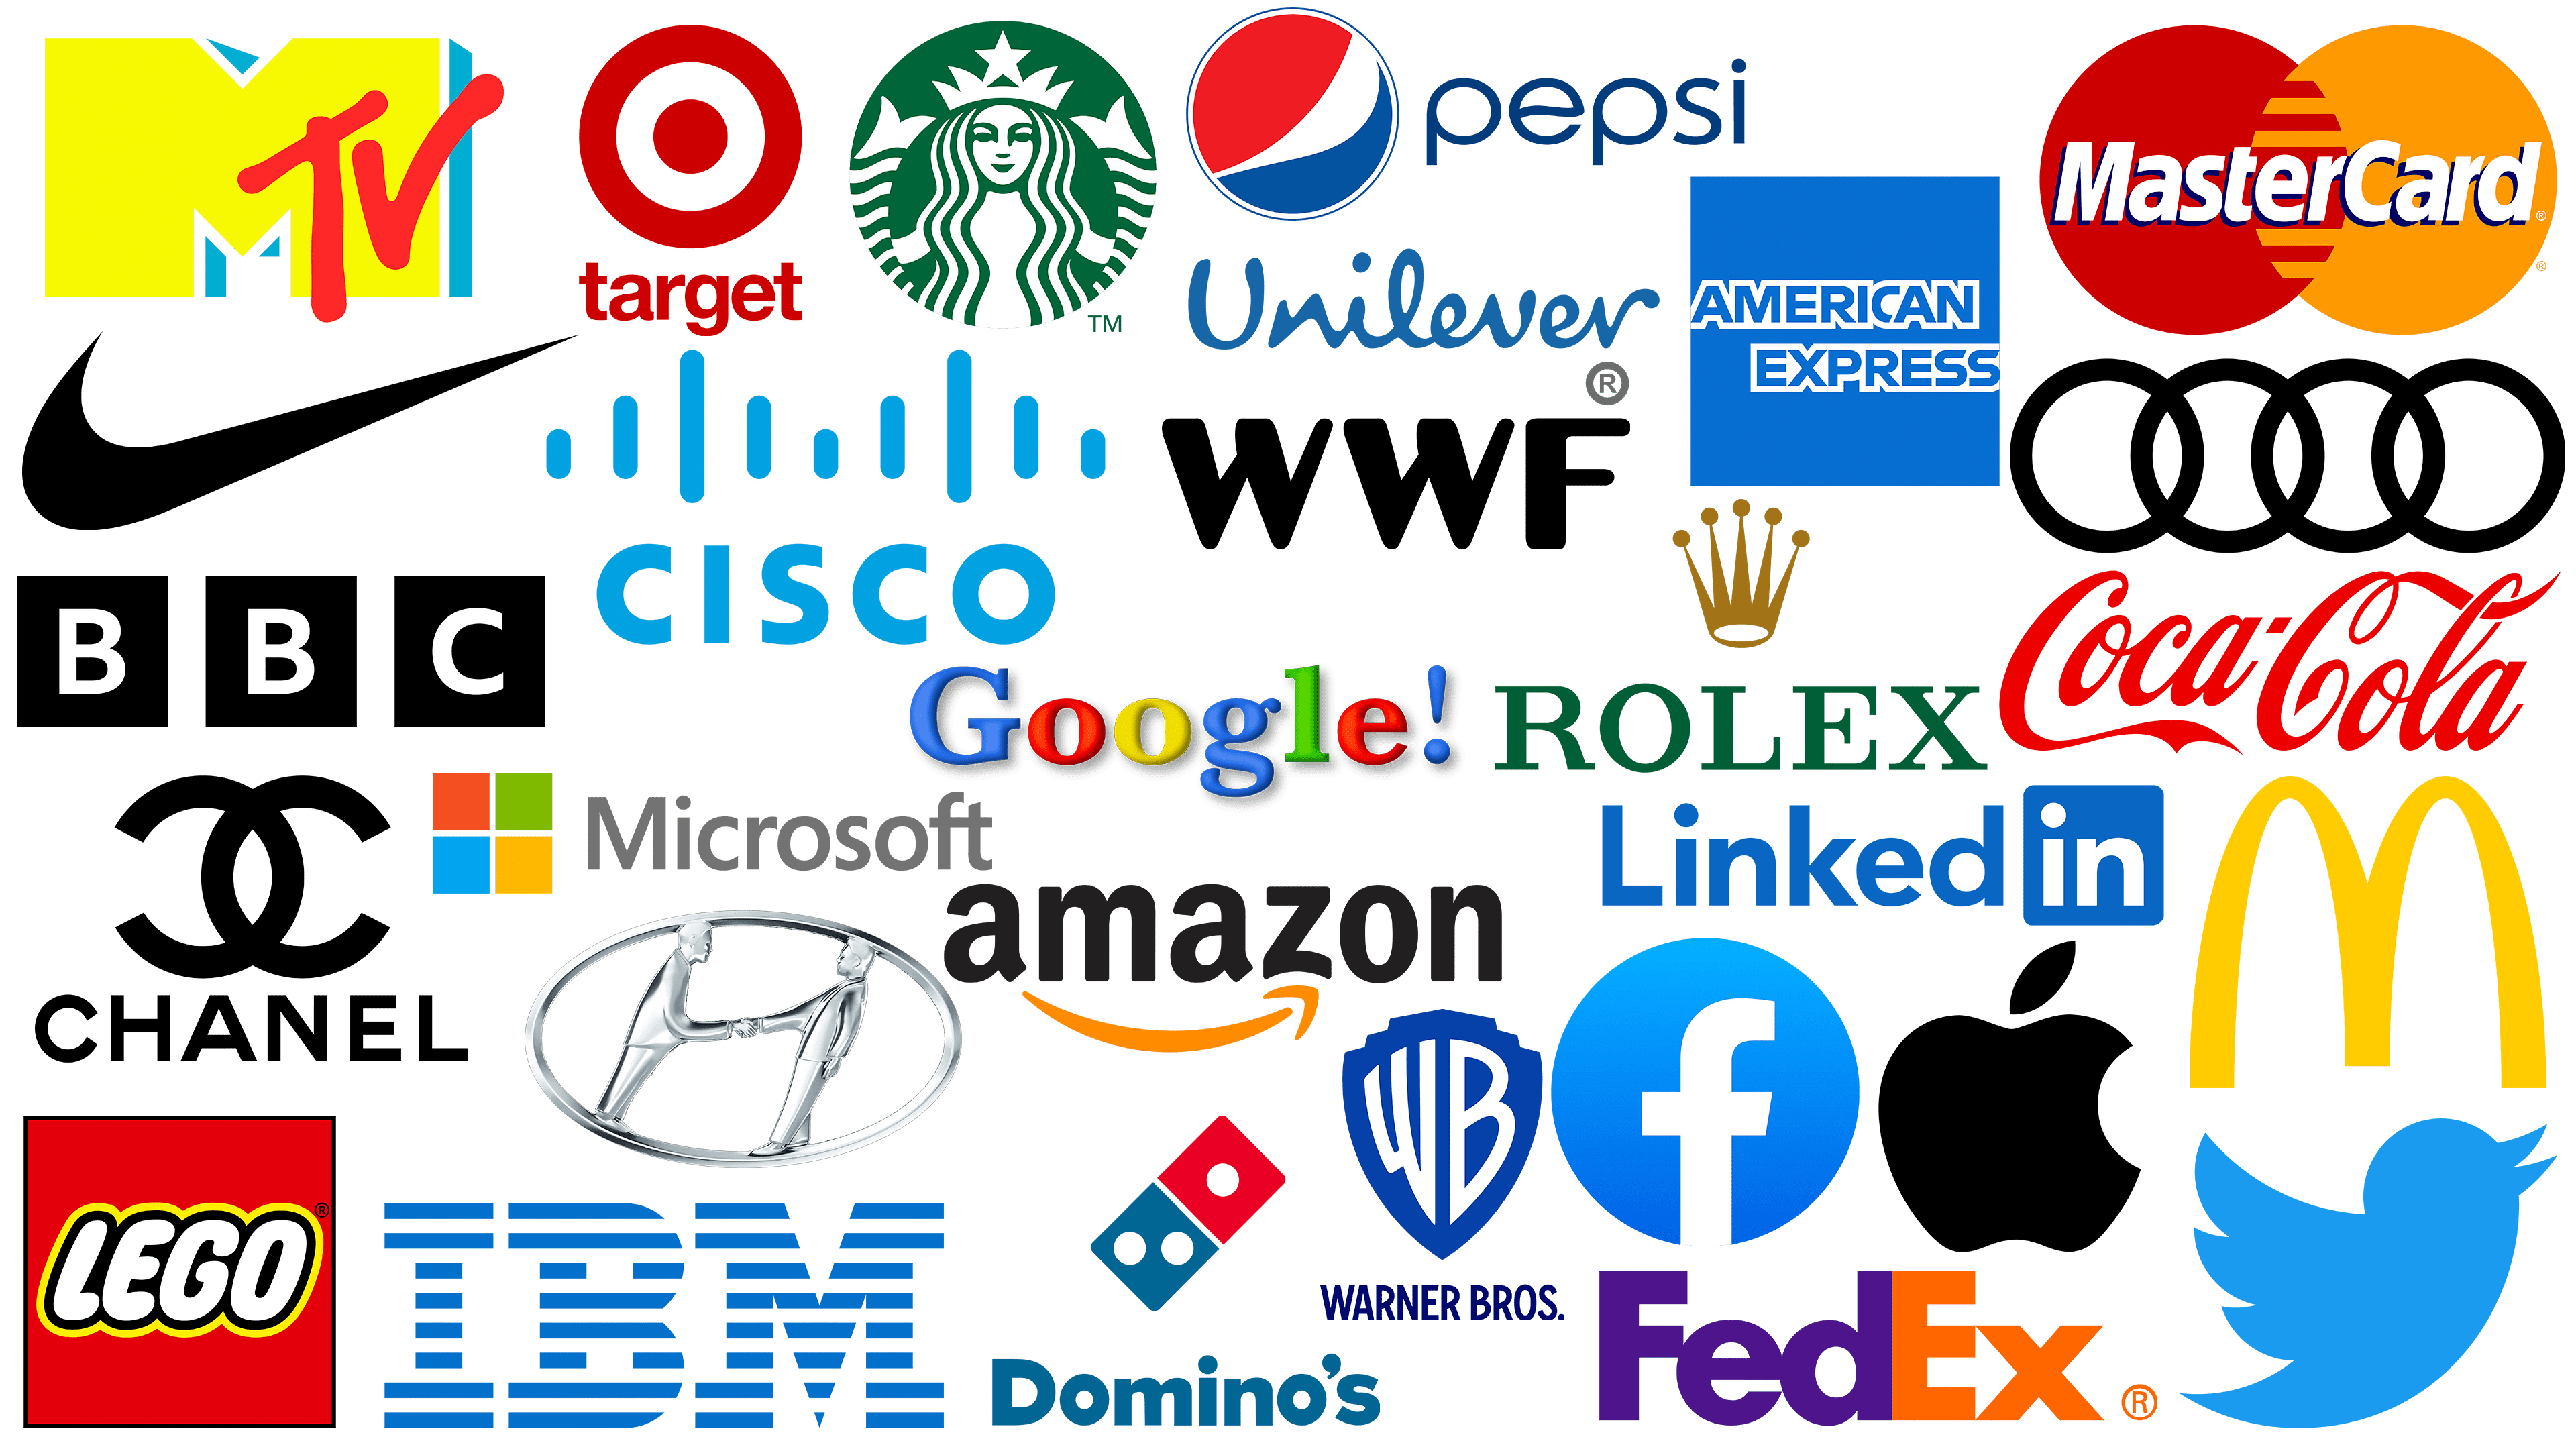 Top-70 Most Famous Logos With a Circle